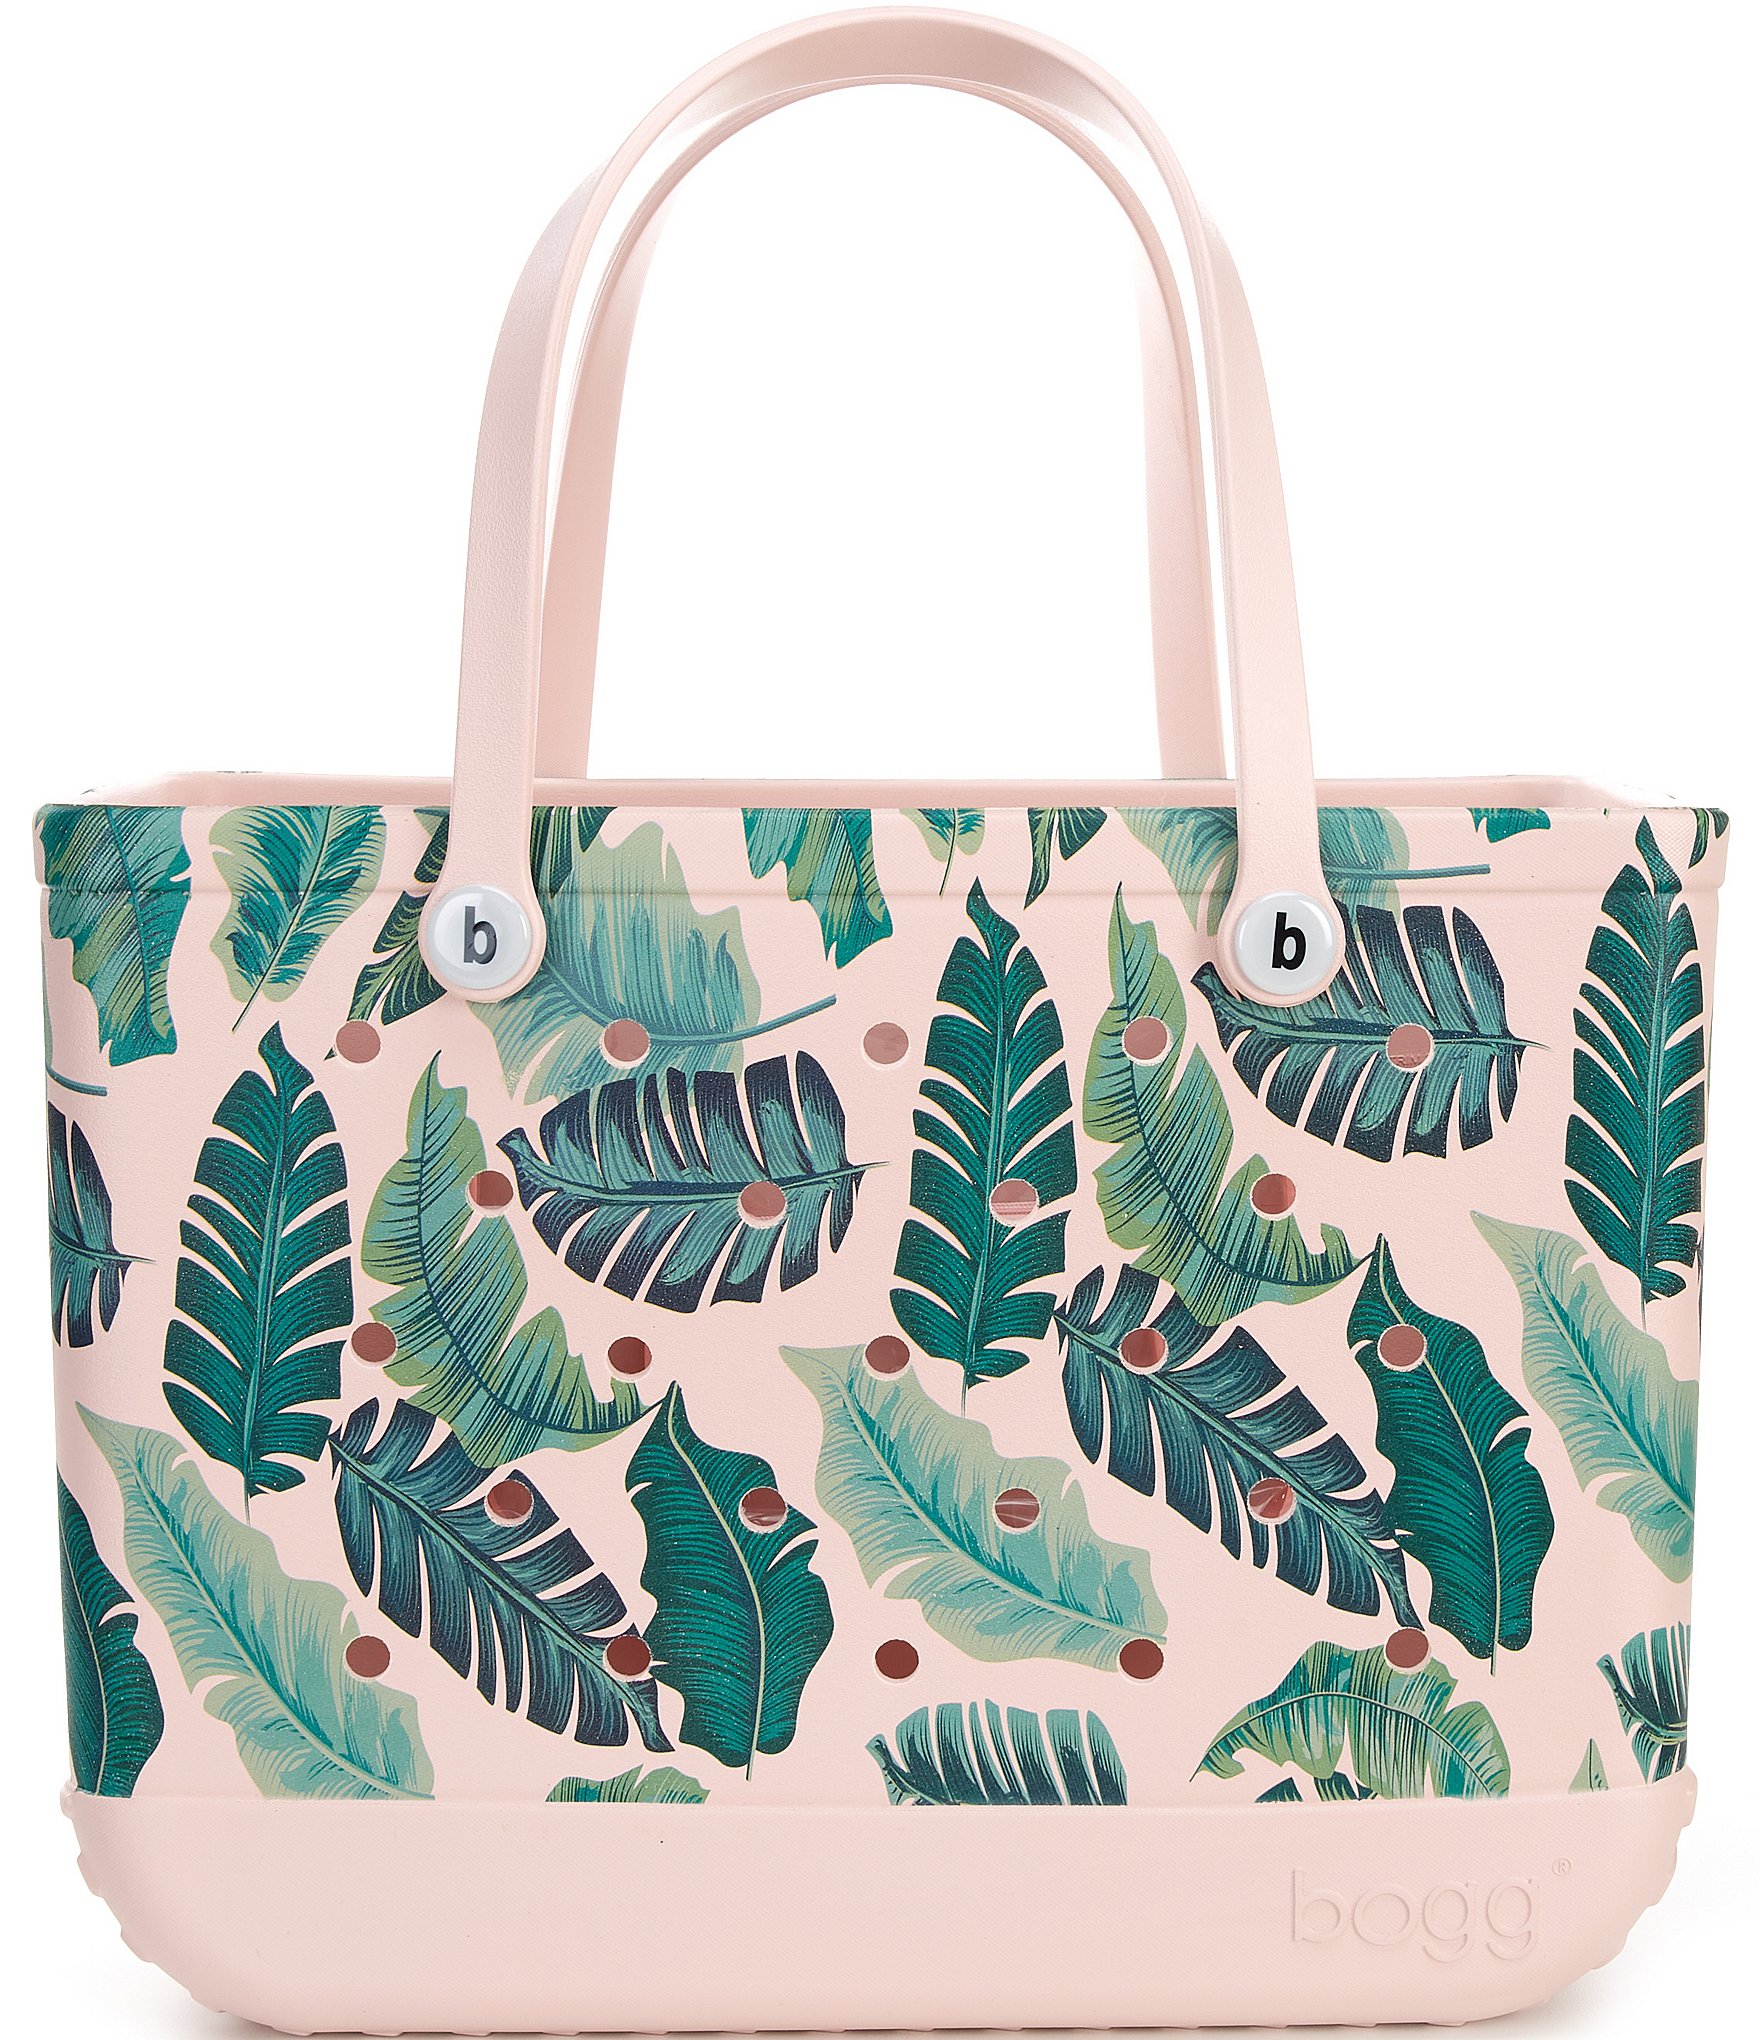 NWT Baby Bogg Bag Palm Leaf Print Limited Edition Small Tote 